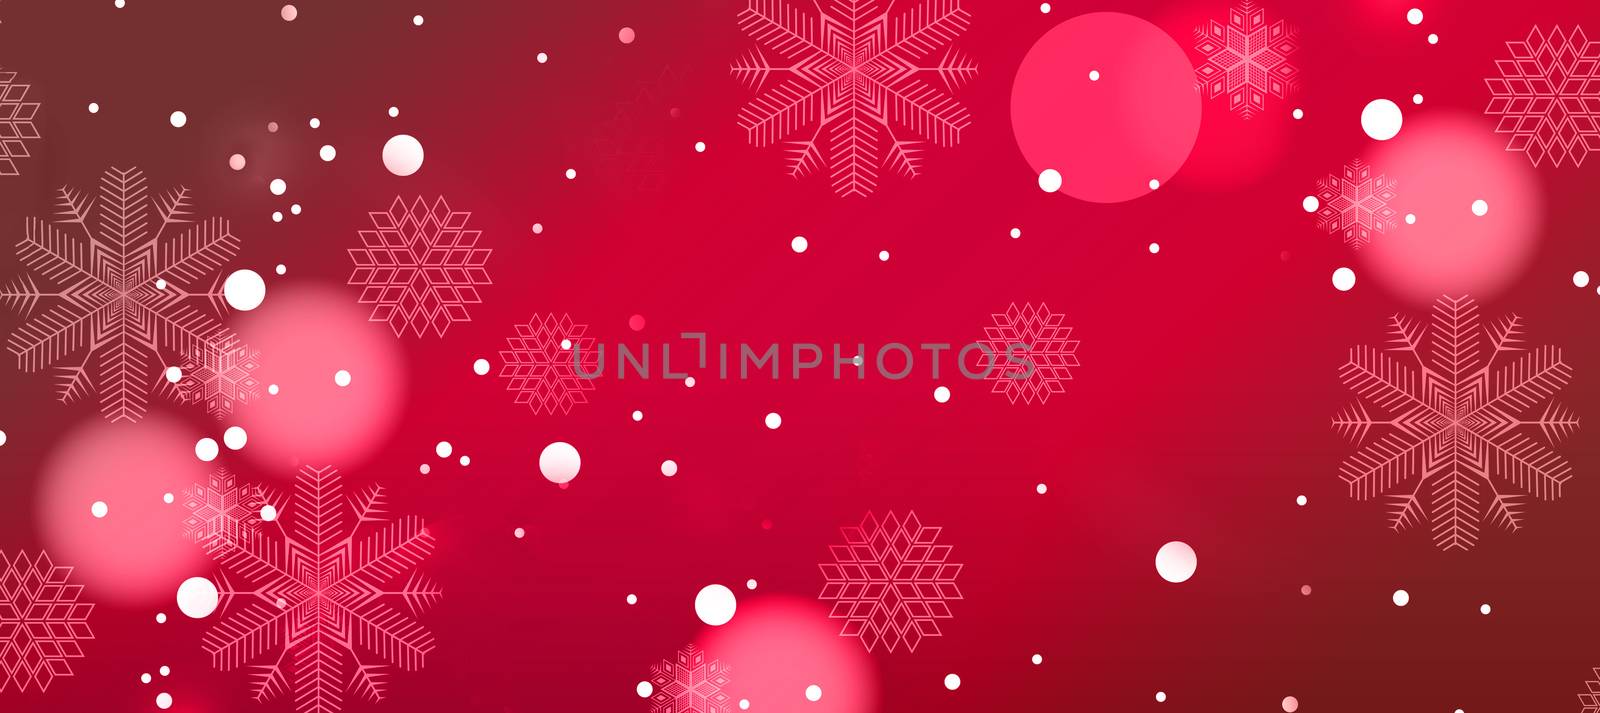 Christmas greetings, festive background for the images. by georgina198